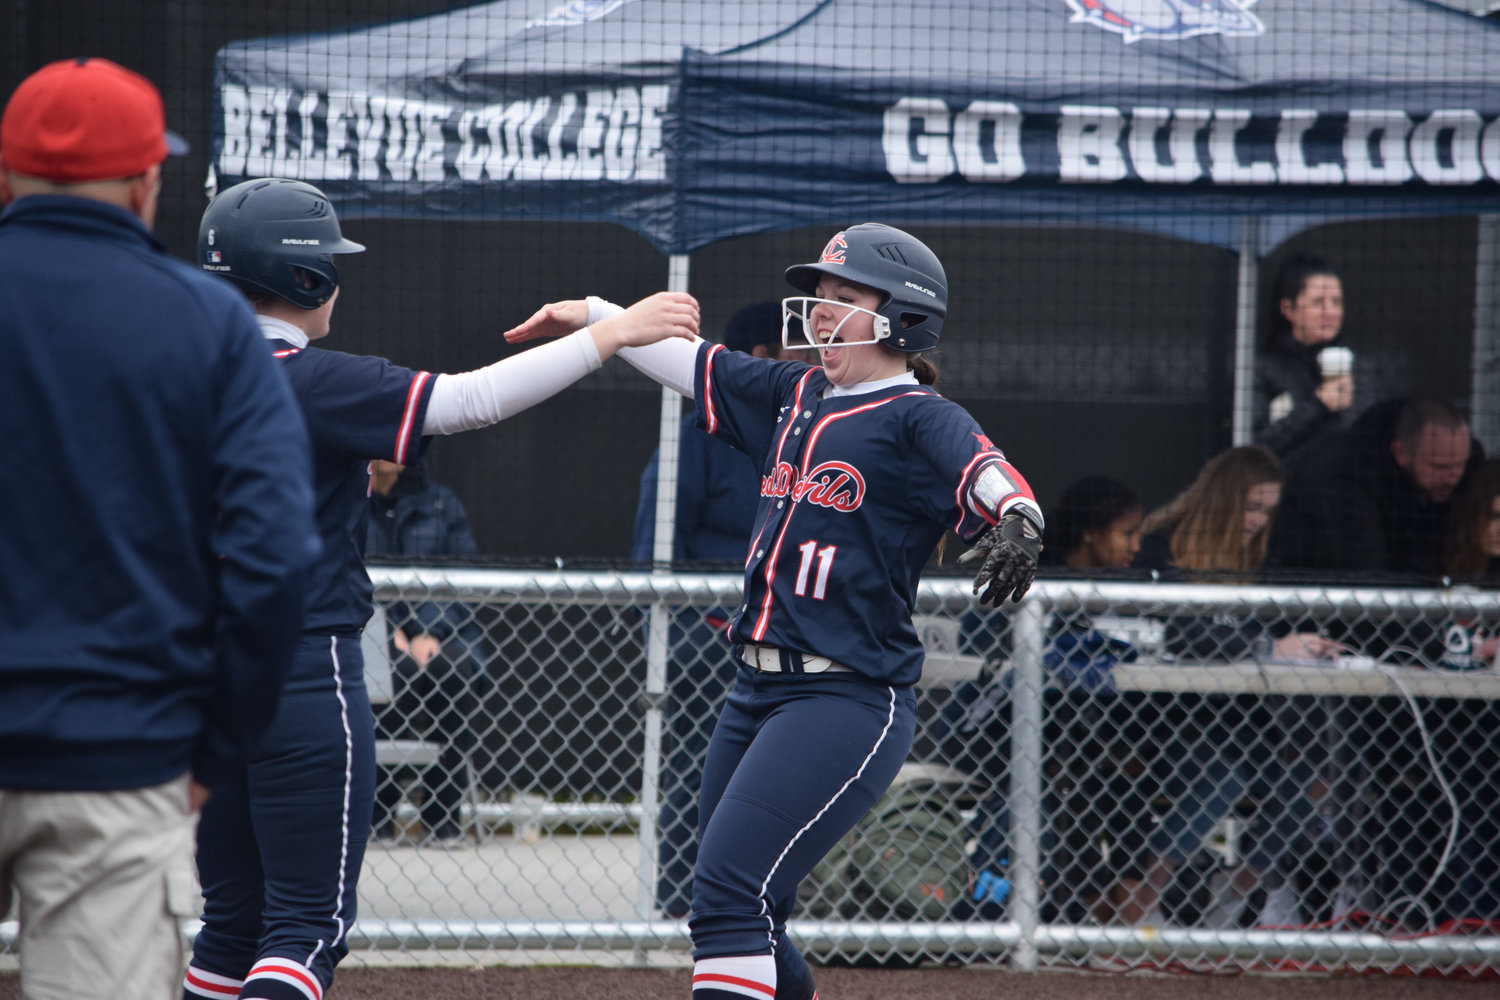 Napavine alumna Ada Williams (11) celebrates with a Lower Columbia teammate after hitting a home run in March.